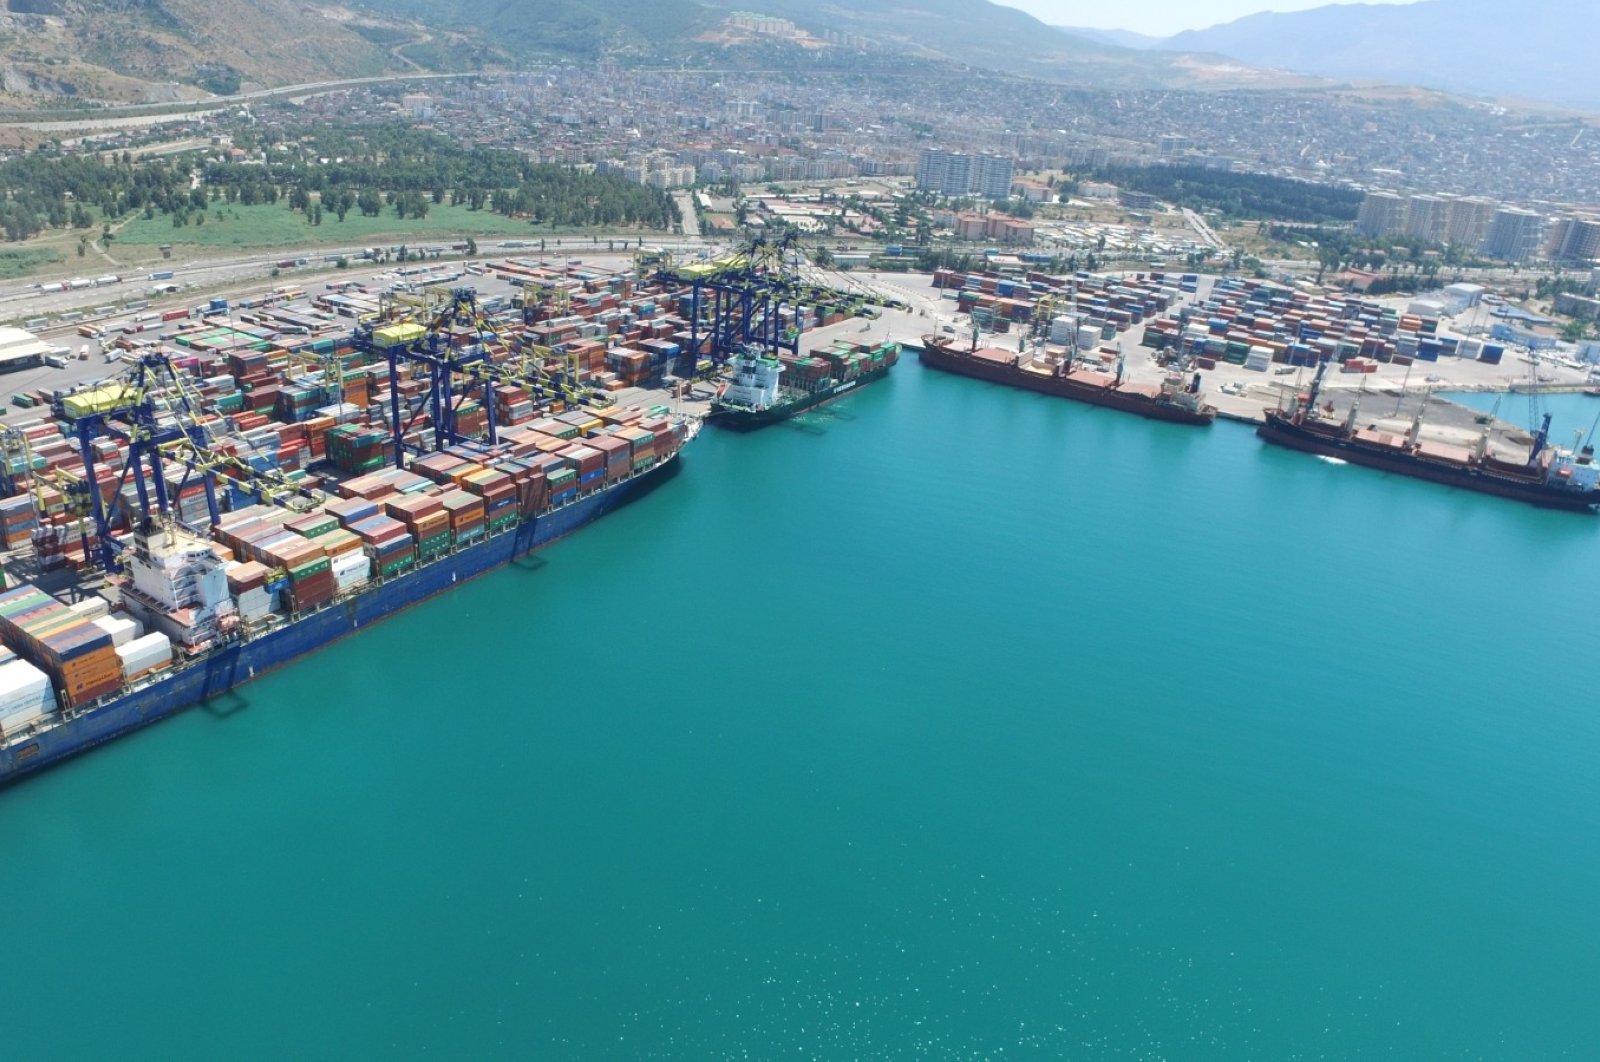 A general view of LimakPort Iskenderun International Port in southern Hatay province, Turkey, Aug. 12, 2020. (Photo by LimakPort via AA)